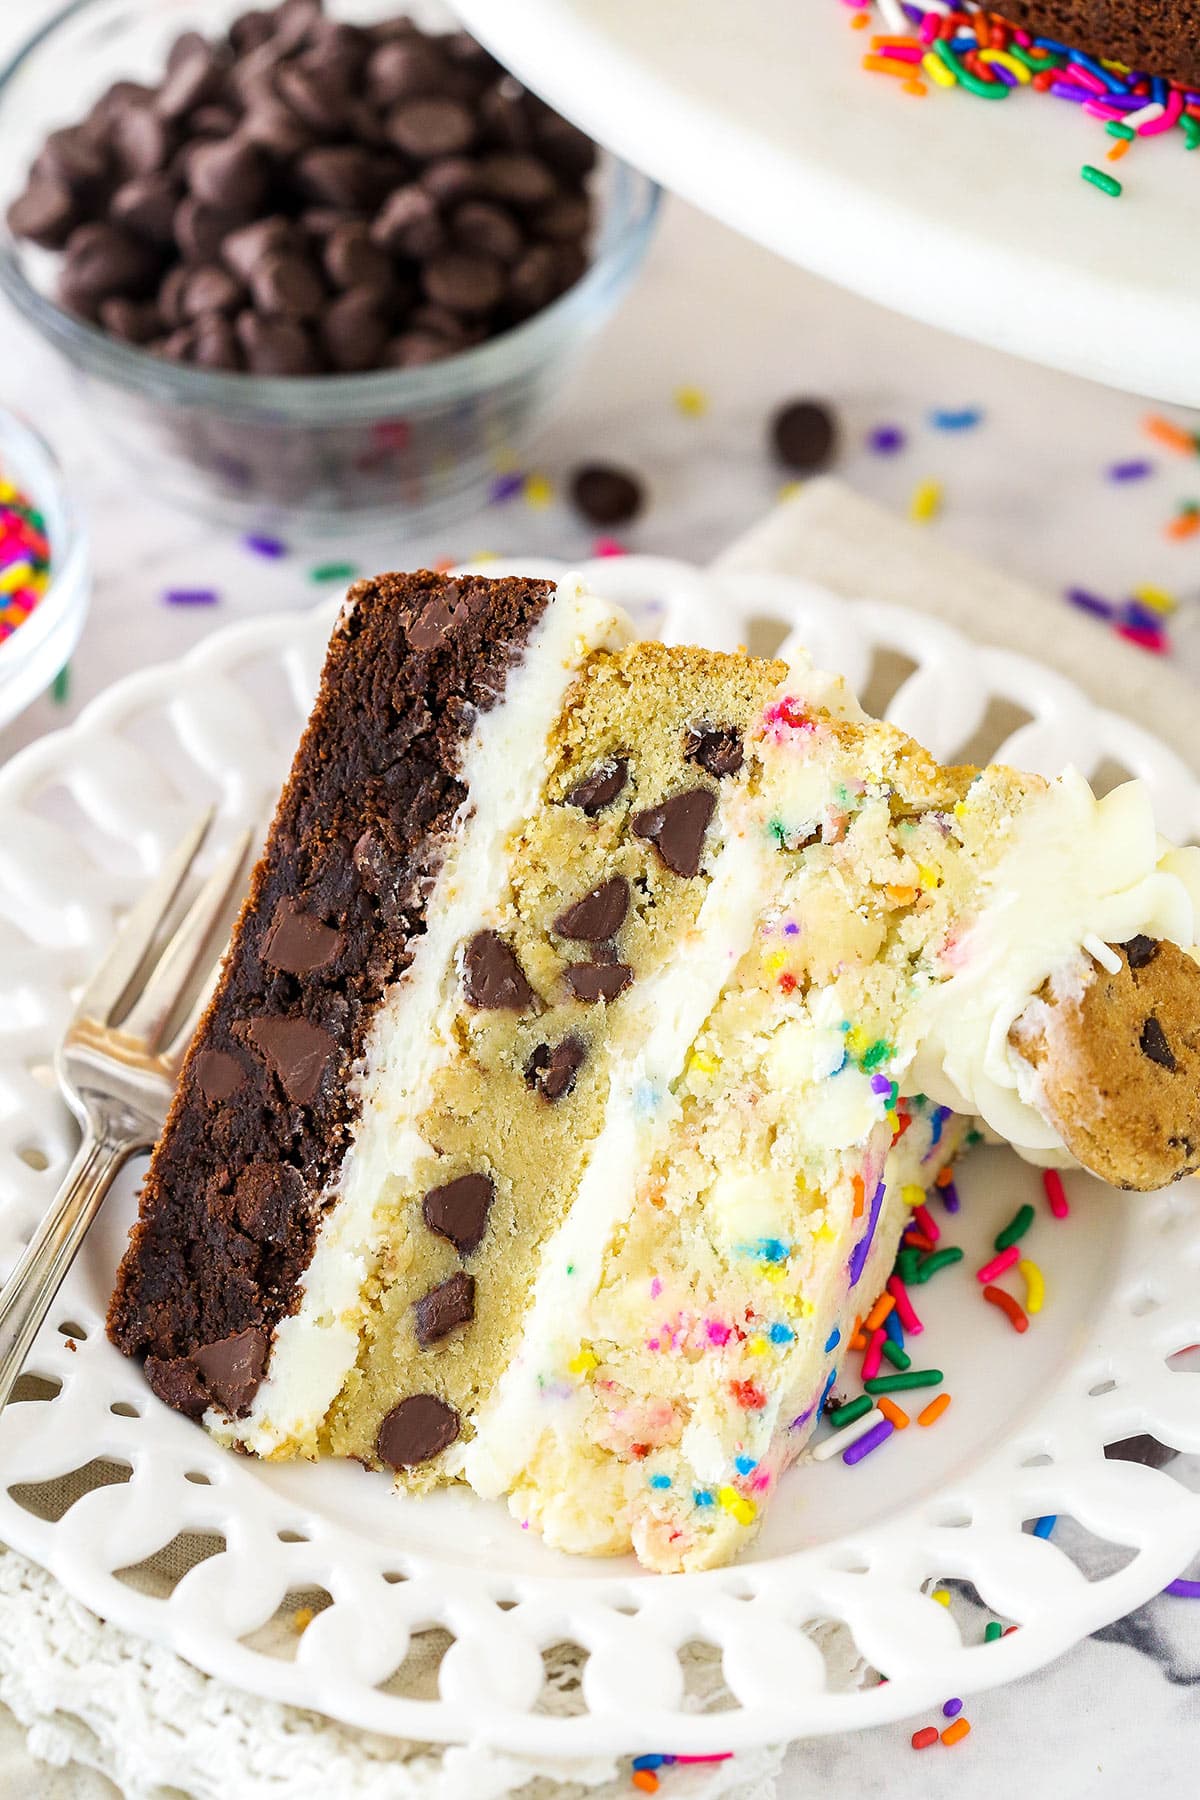 A slice of cookie cake on a plate with a bowl of chocolate chips and the remaining cake in the background